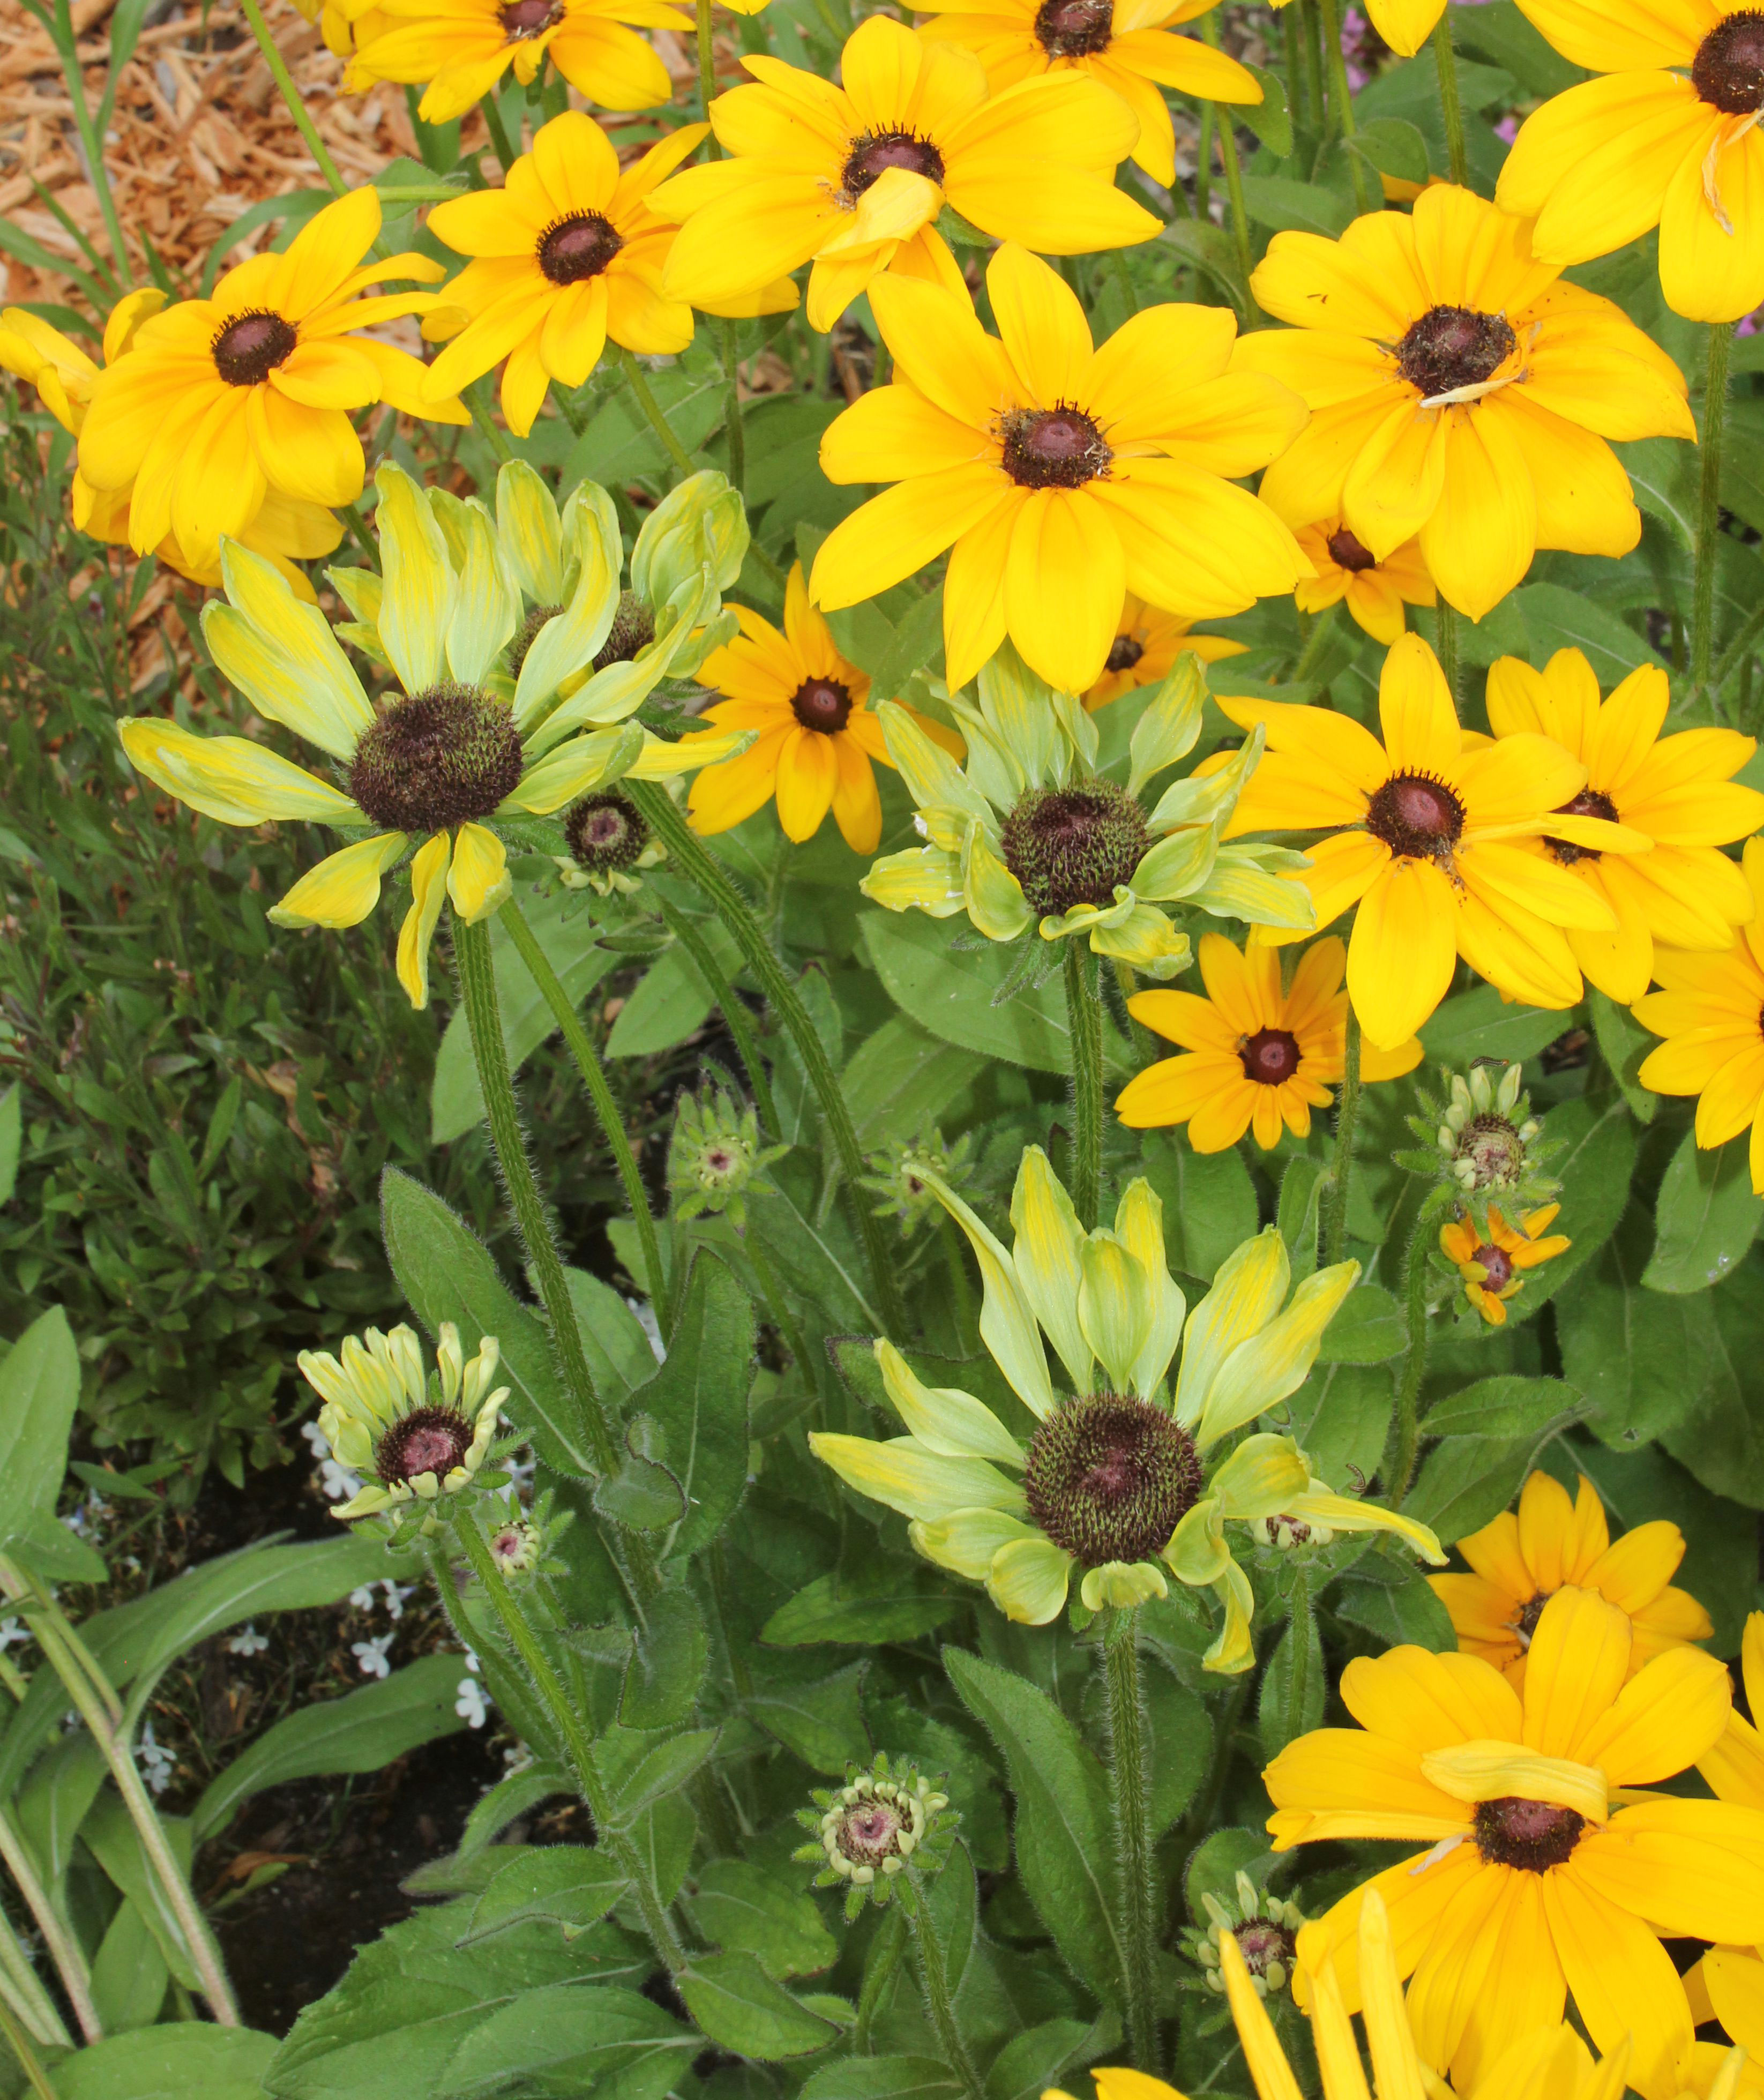 Aster yellow disease spreading throughout a planting of rudbeckia flowers.